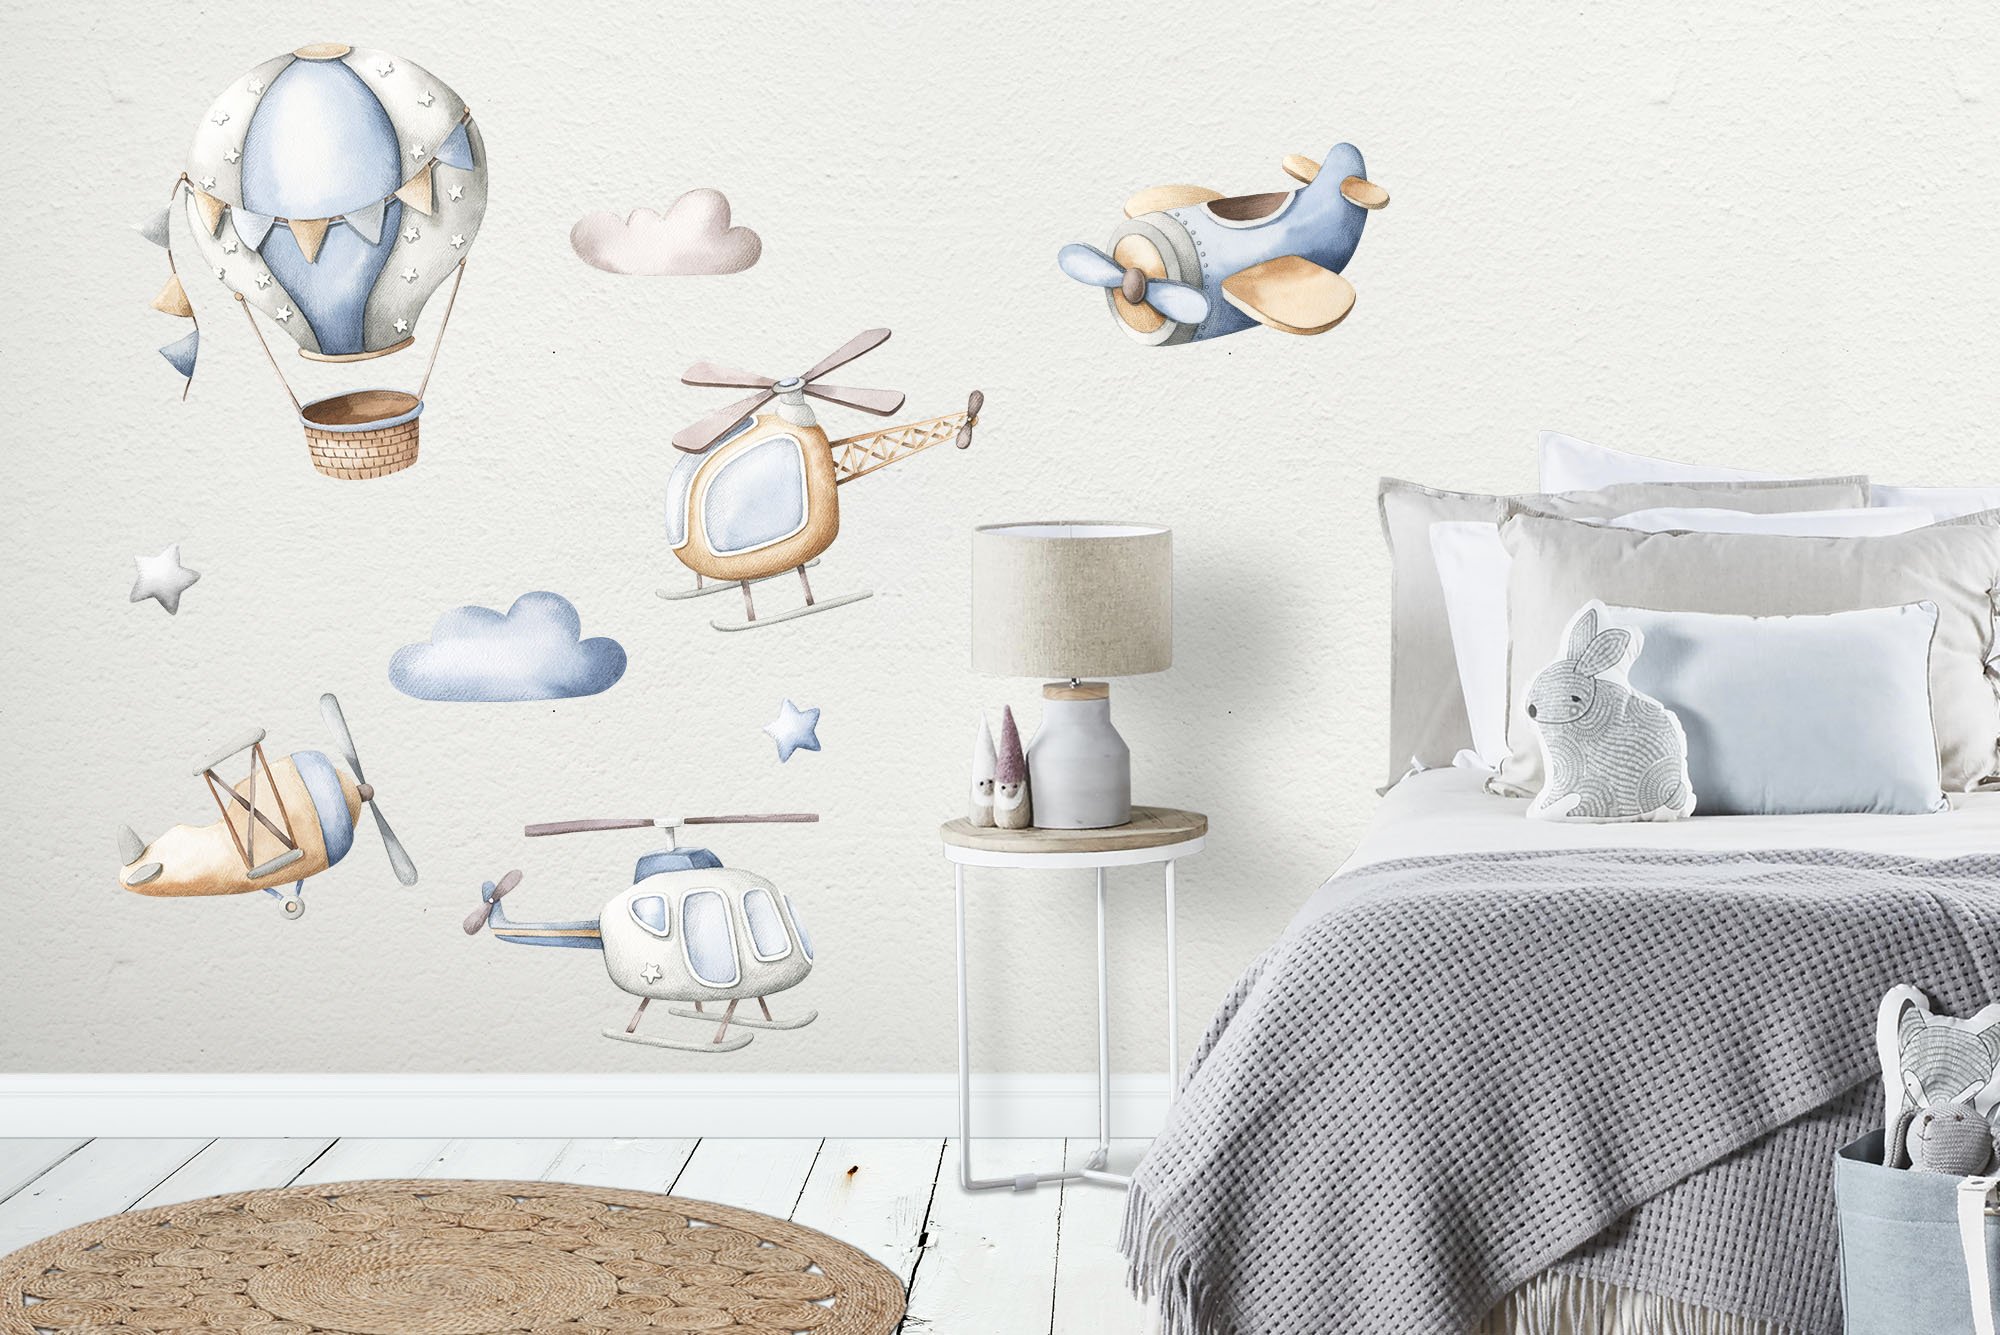 Use these air balloons illustrations to improve your kids room.